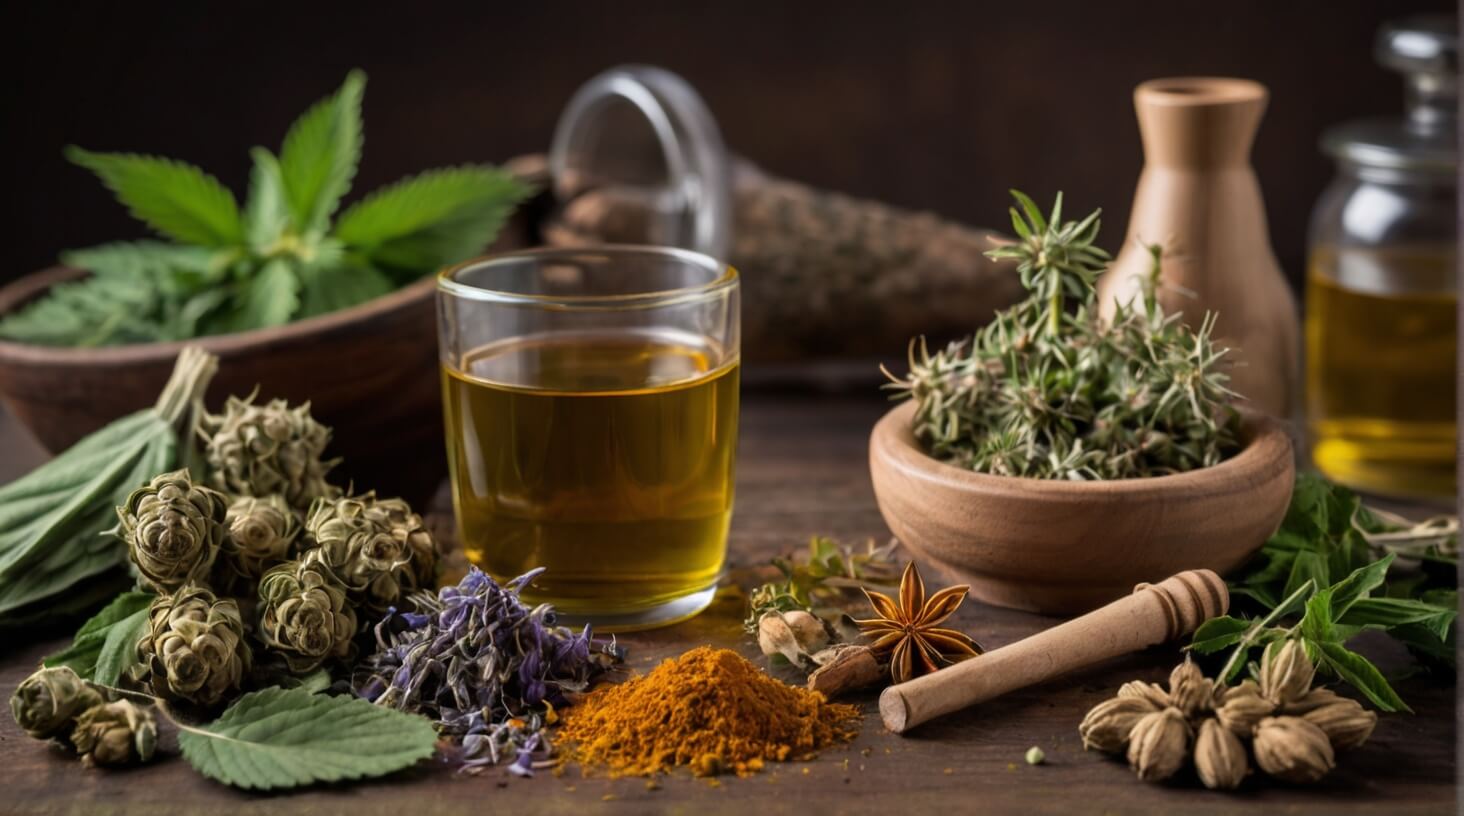 A collection of various herbs and spices arranged neatly on a wooden surface, with steam rising from a cup filled with herbal brew.